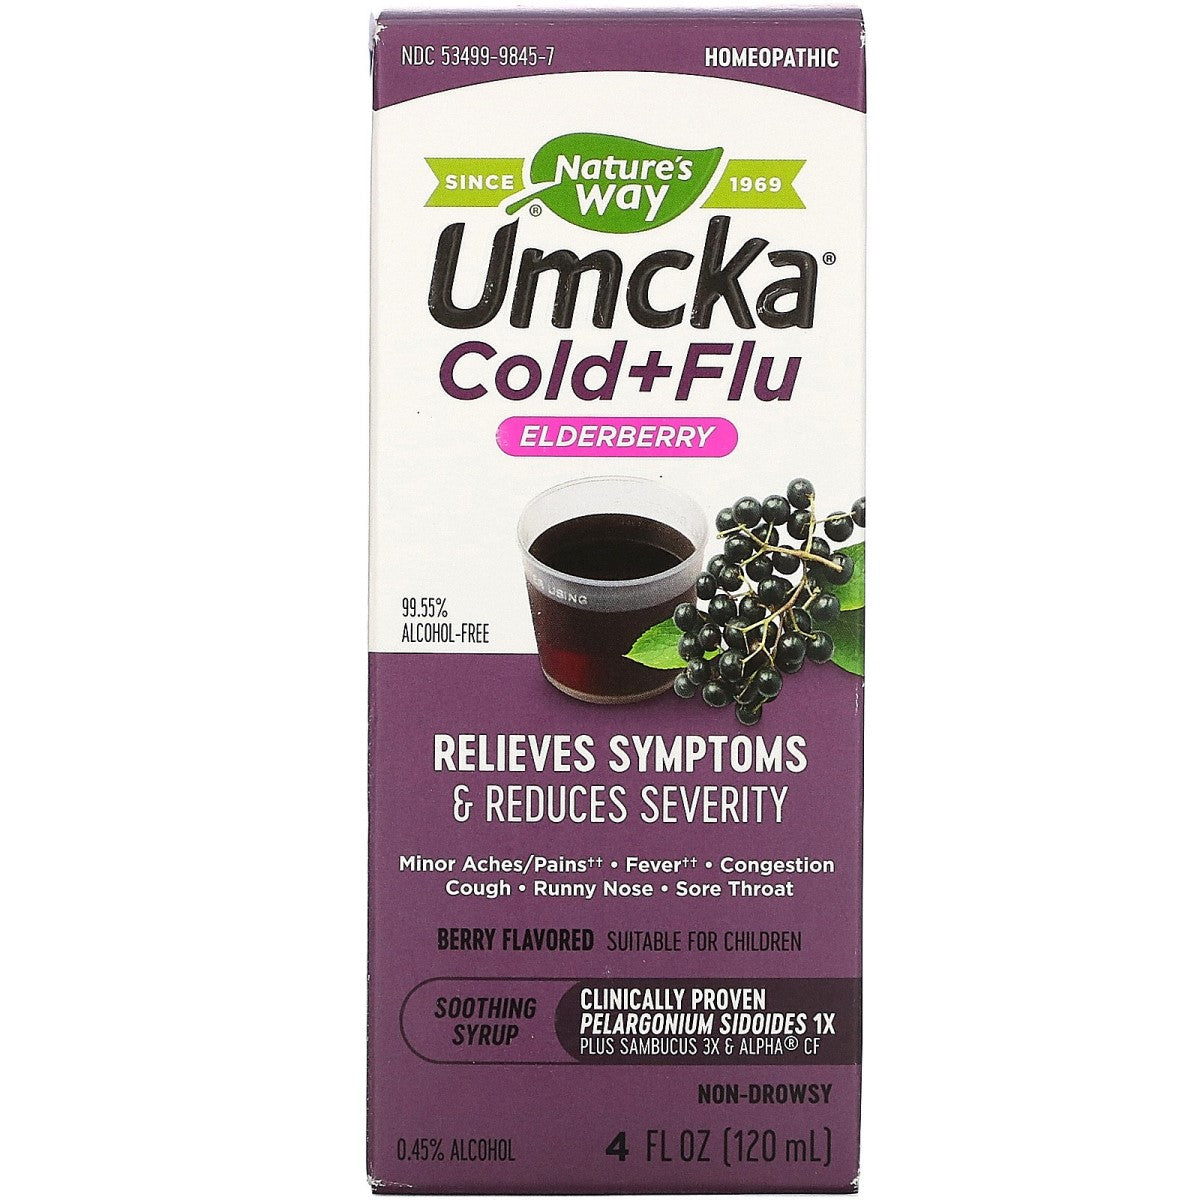 Primary image of Umcka Elderberry Intensive Cold+Flu Soothing Syrup